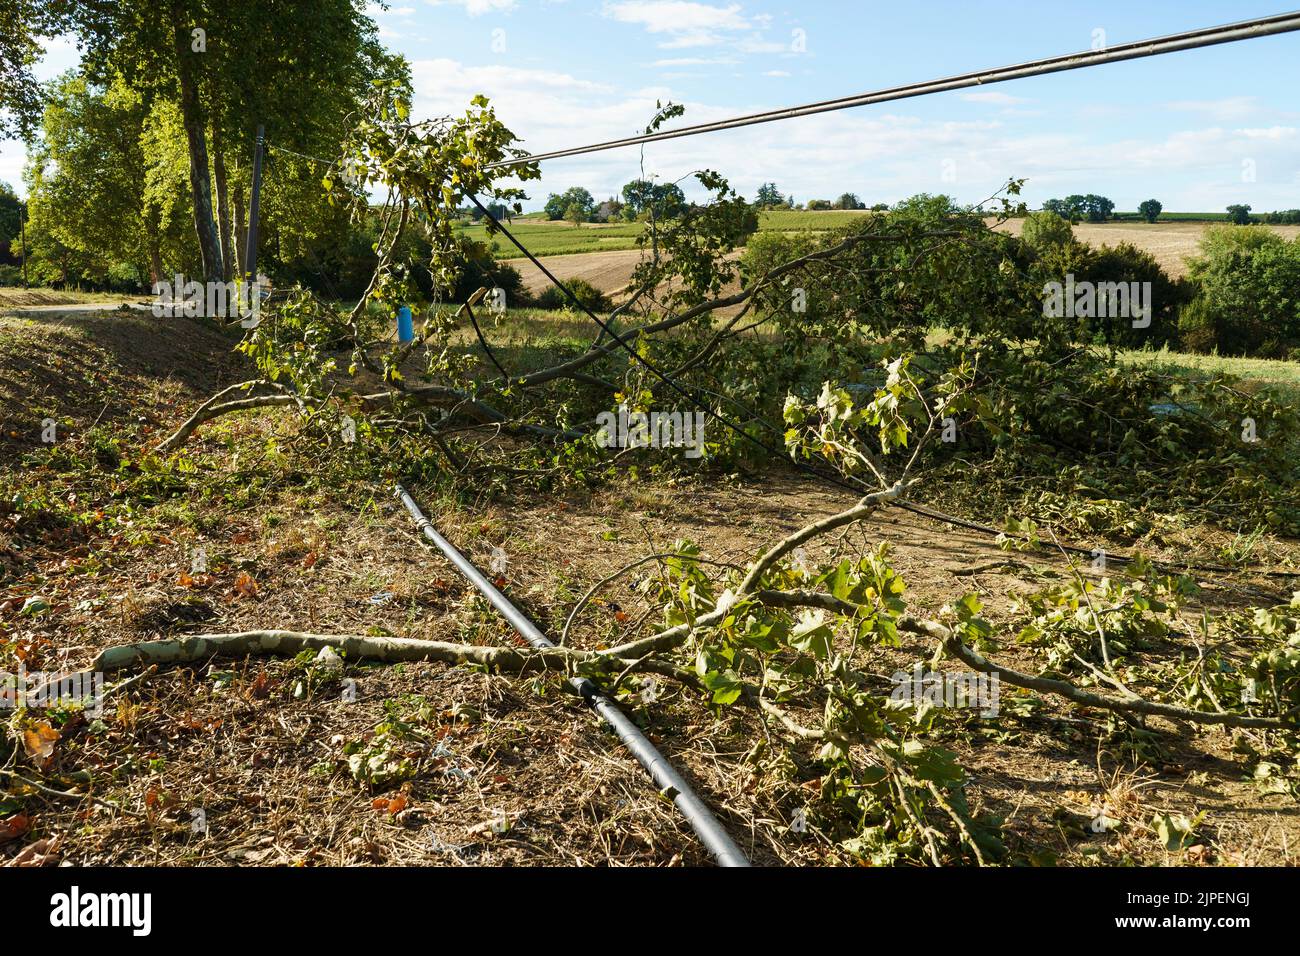 FRANCE: Weather - Telephone lines and poles are brought down by a storm, on a road outside of Condom, France, in August 2022. Global warning and climate change. © Credit:  David Levenson/Alamy Stock Photo